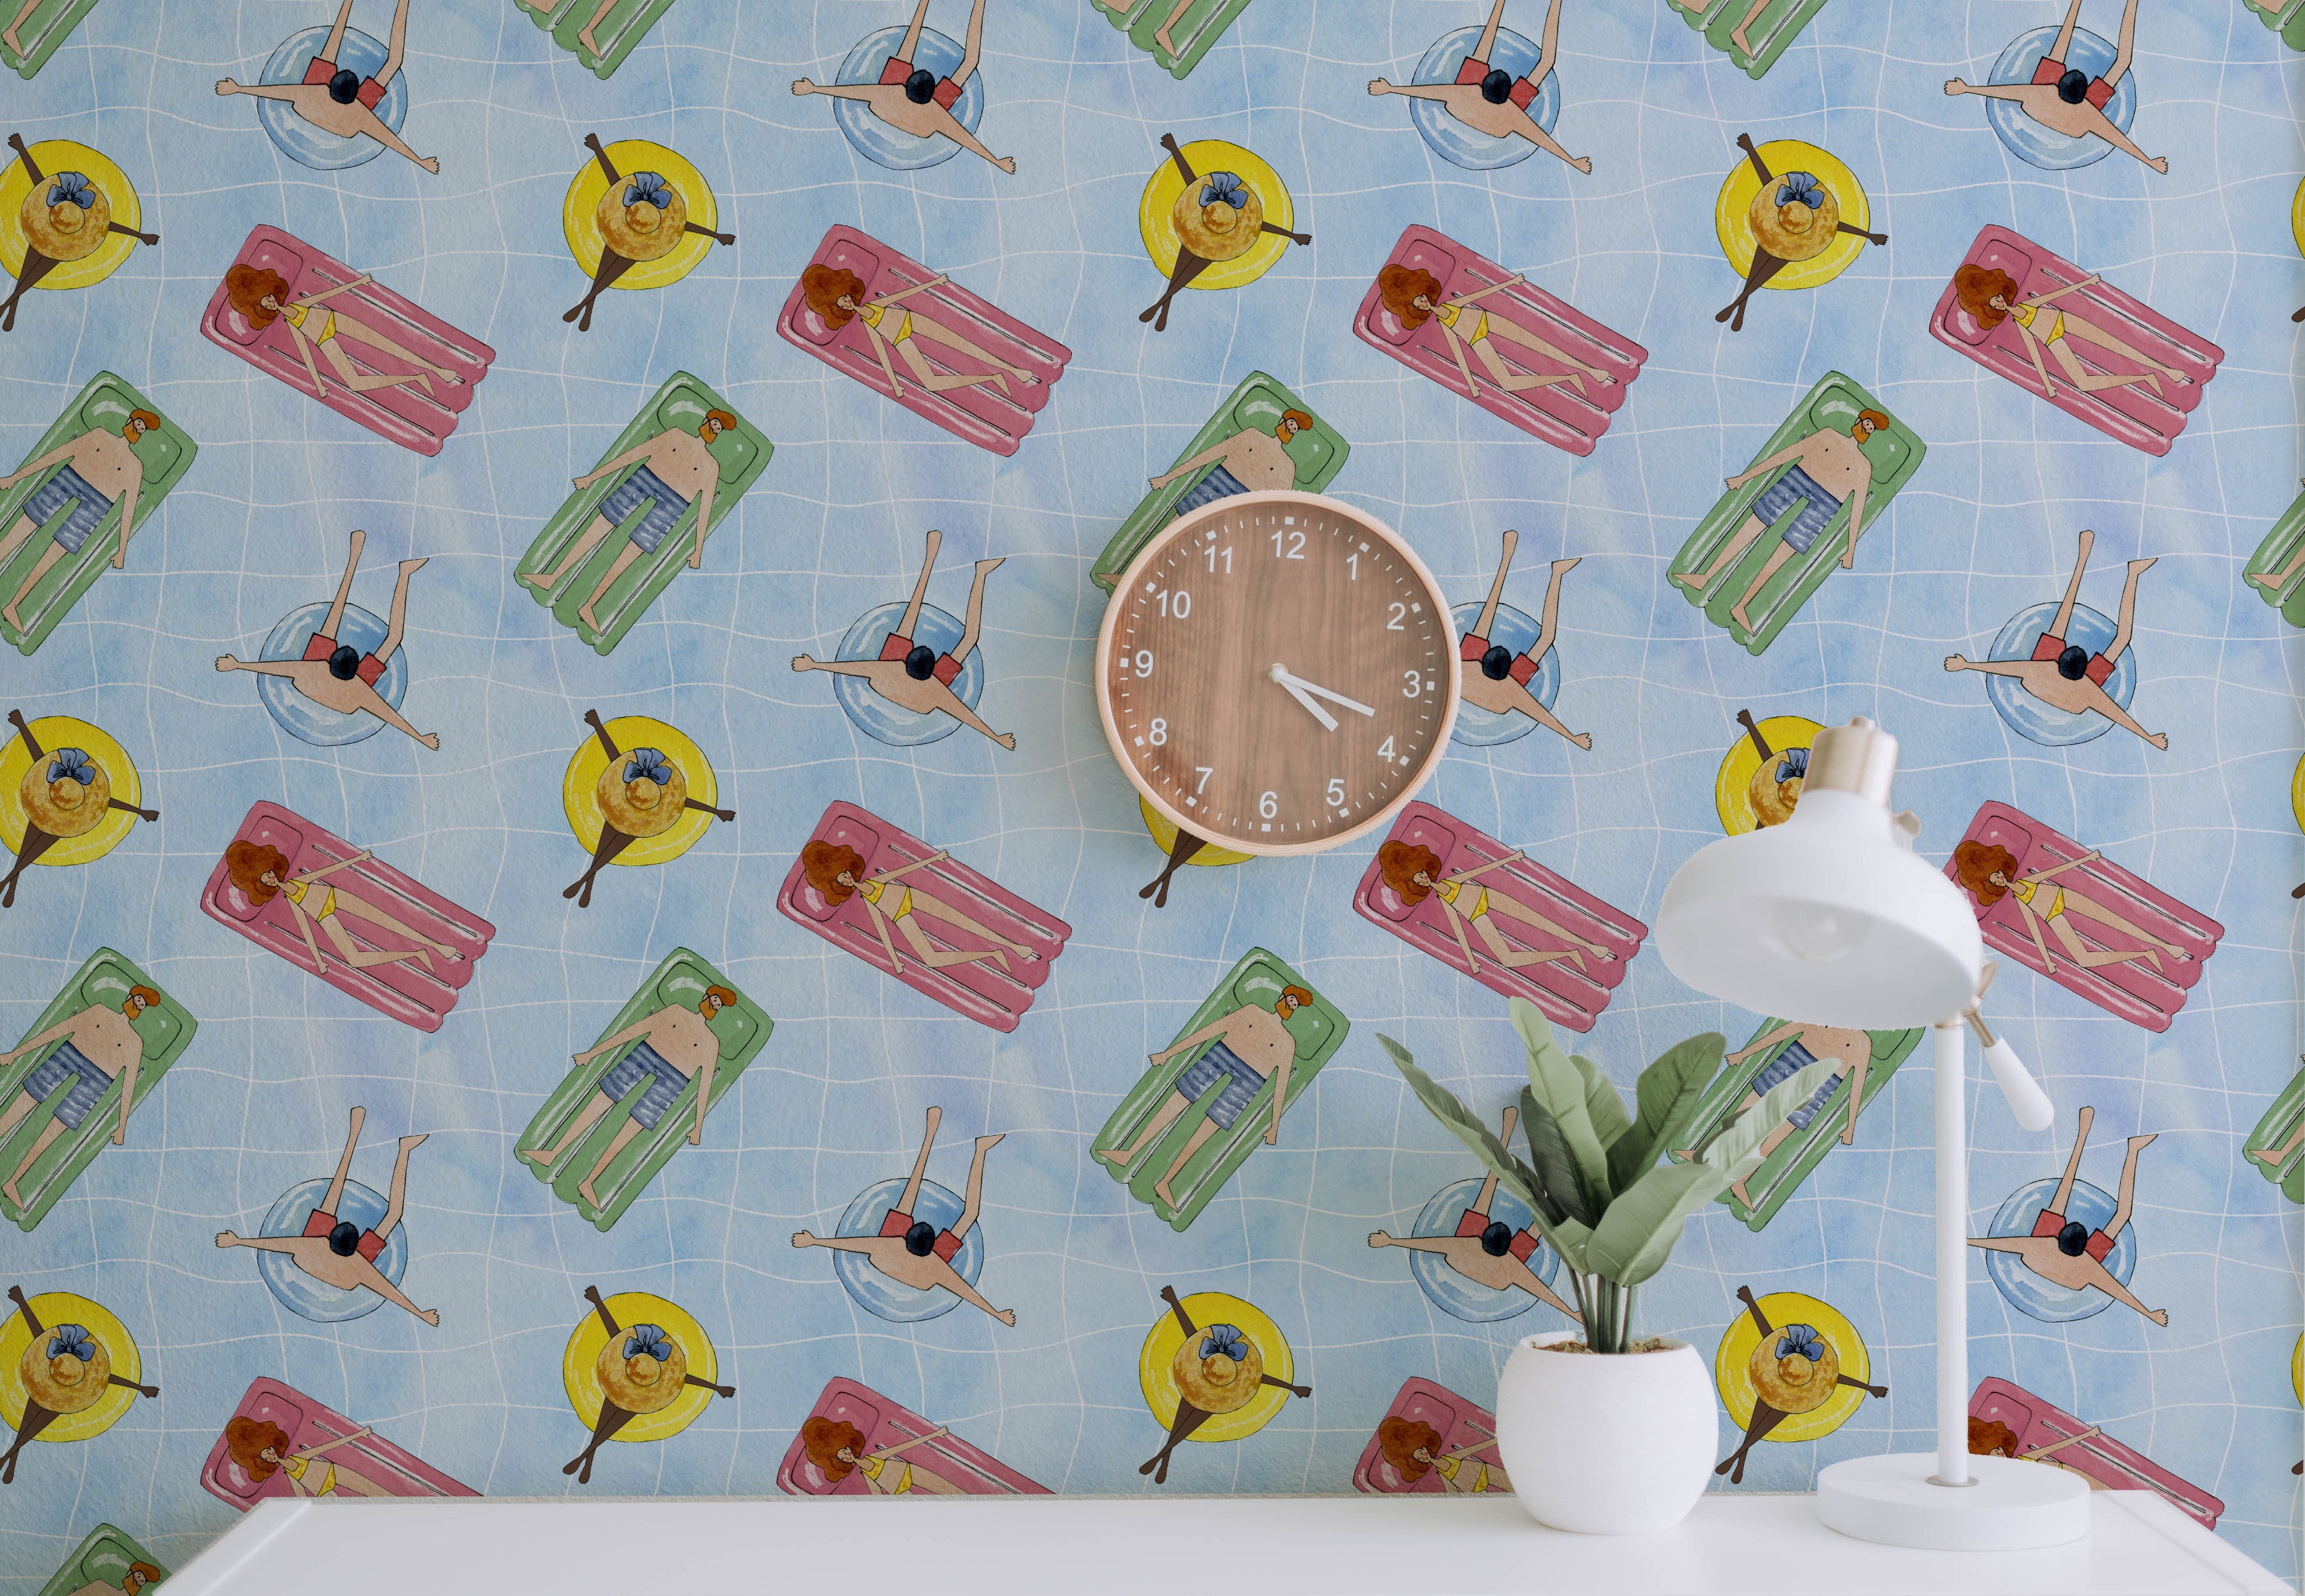 A lively room featuring the Pool Party Wallpaper with illustrations of people on pool floats. A white desk, lamp, and potted plant add modern accents.